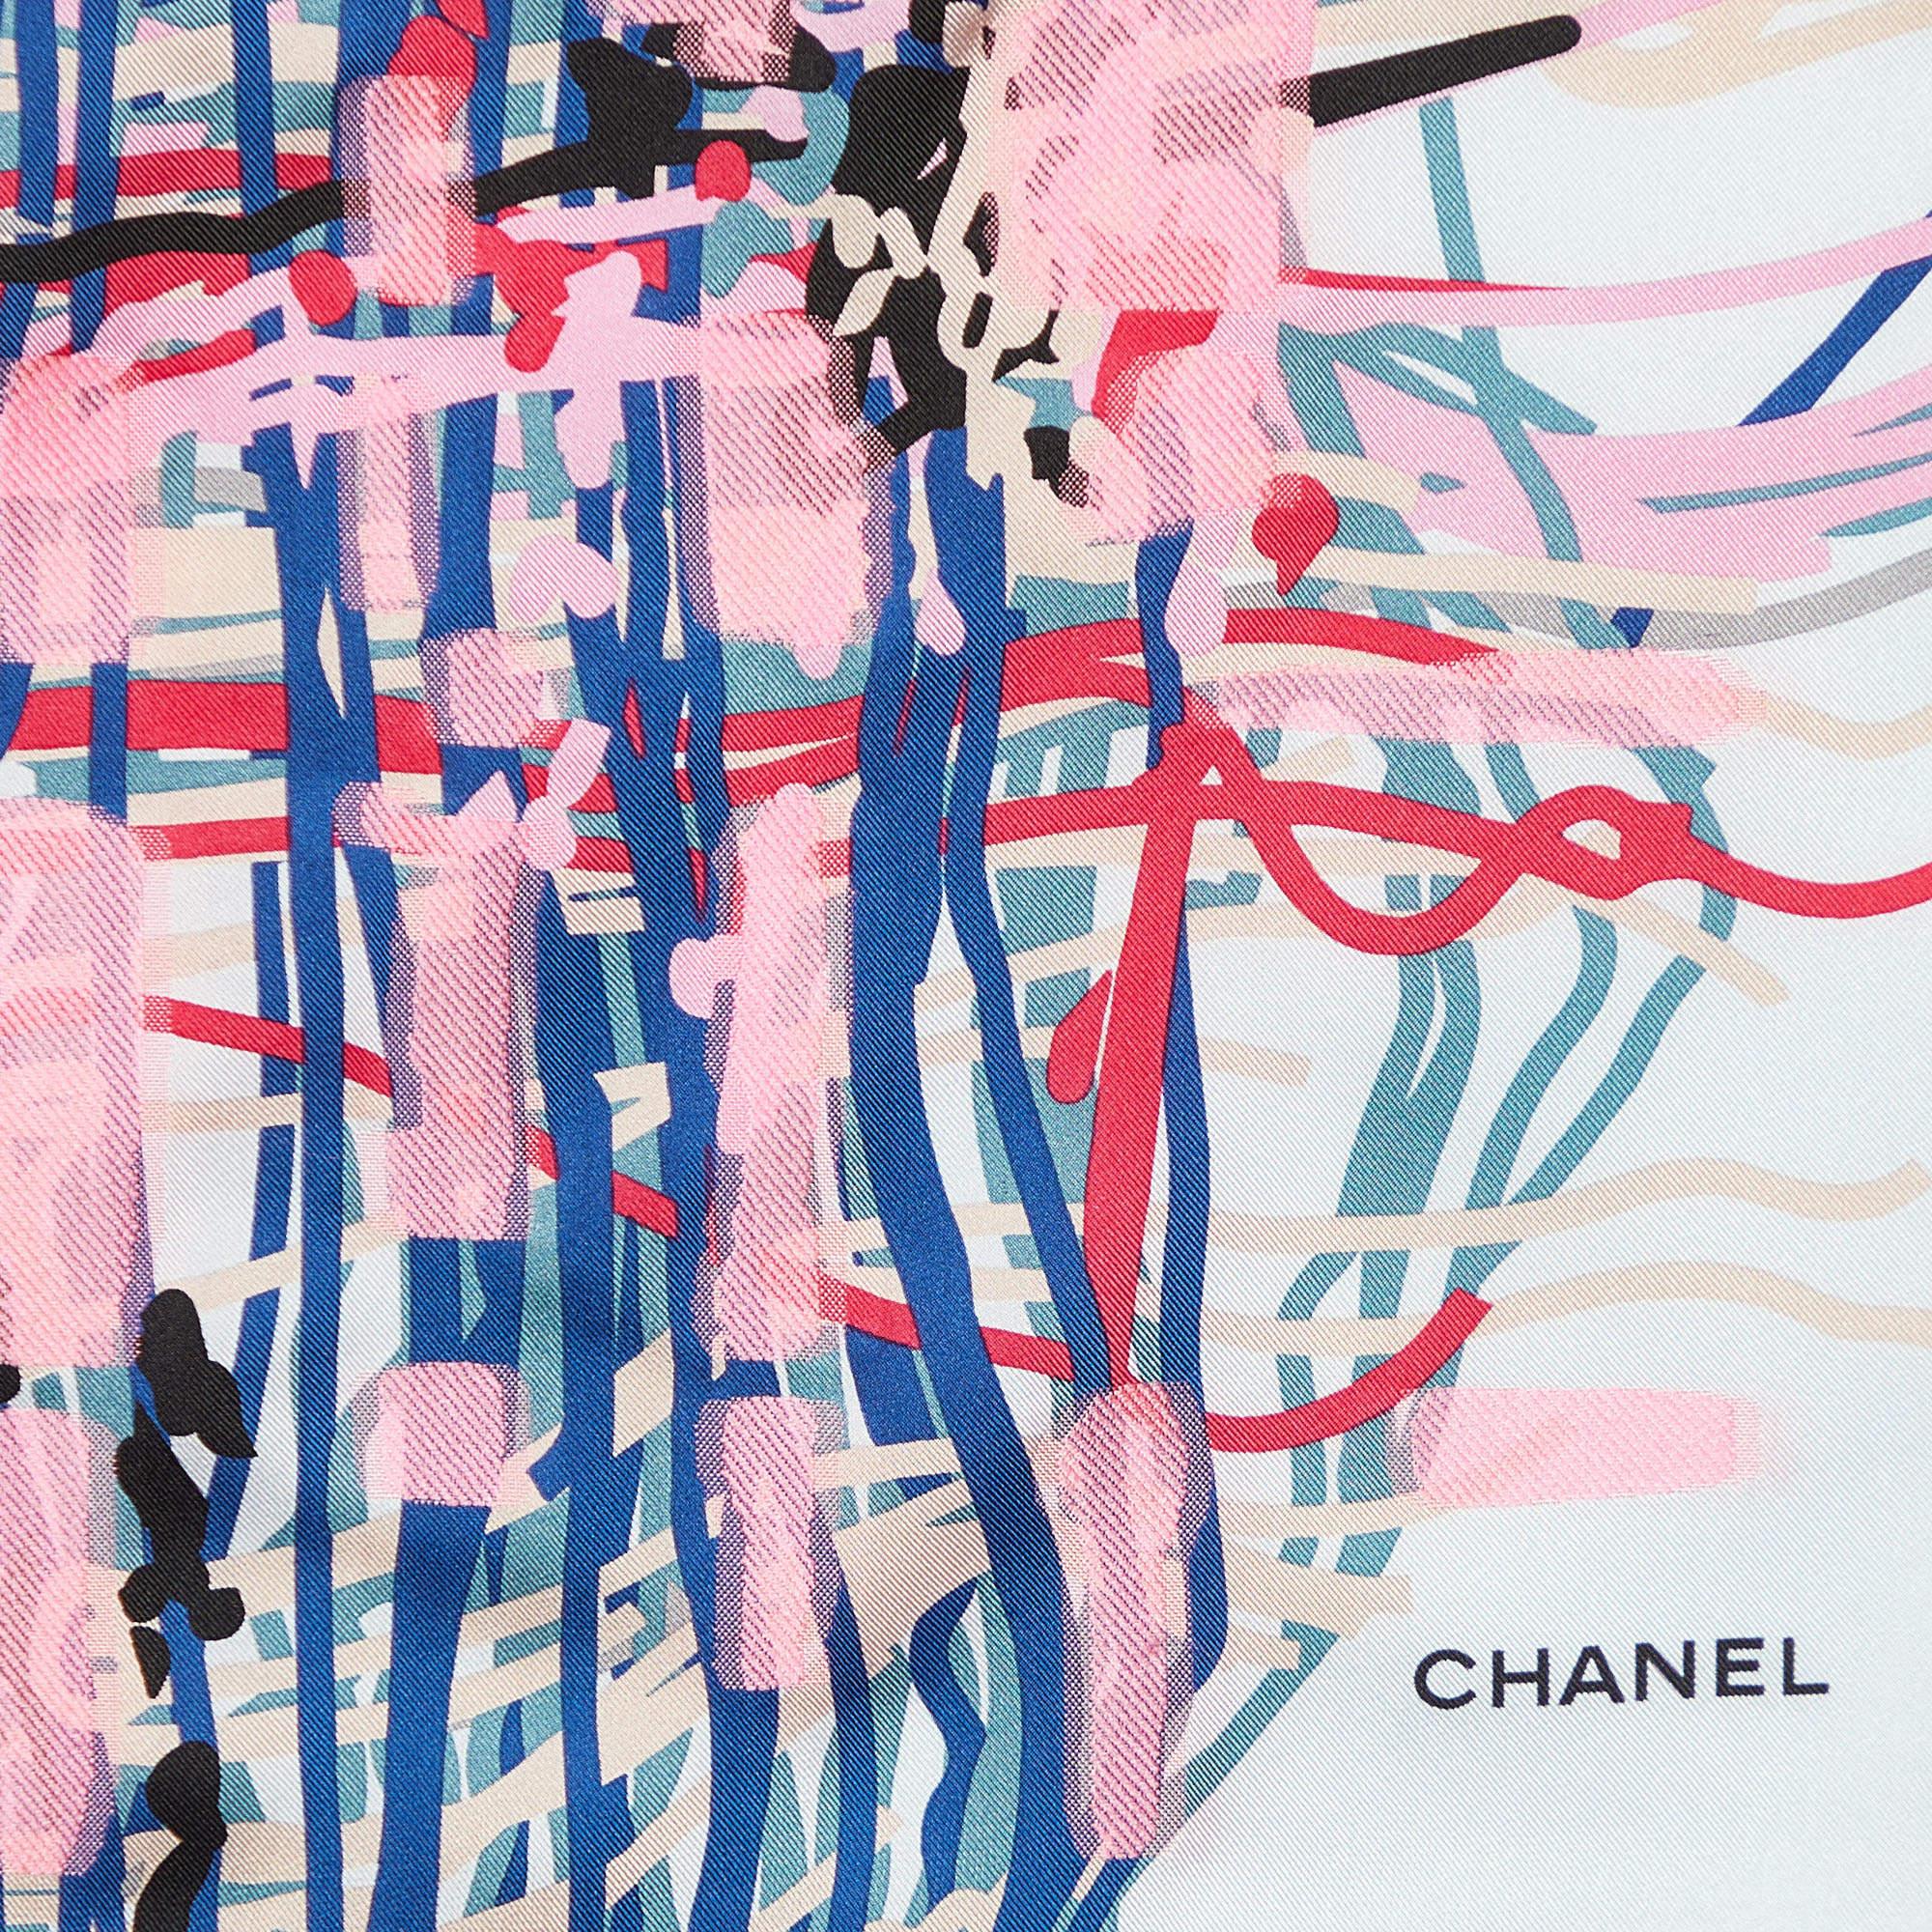 The perfect punctuation to your stylish look will be this Chanel scarf! It has been stitched using soft materials in a versatile shade and adorned with a CC accent for a signature touch. Wrap it around your neck to accessorize the chic way!

